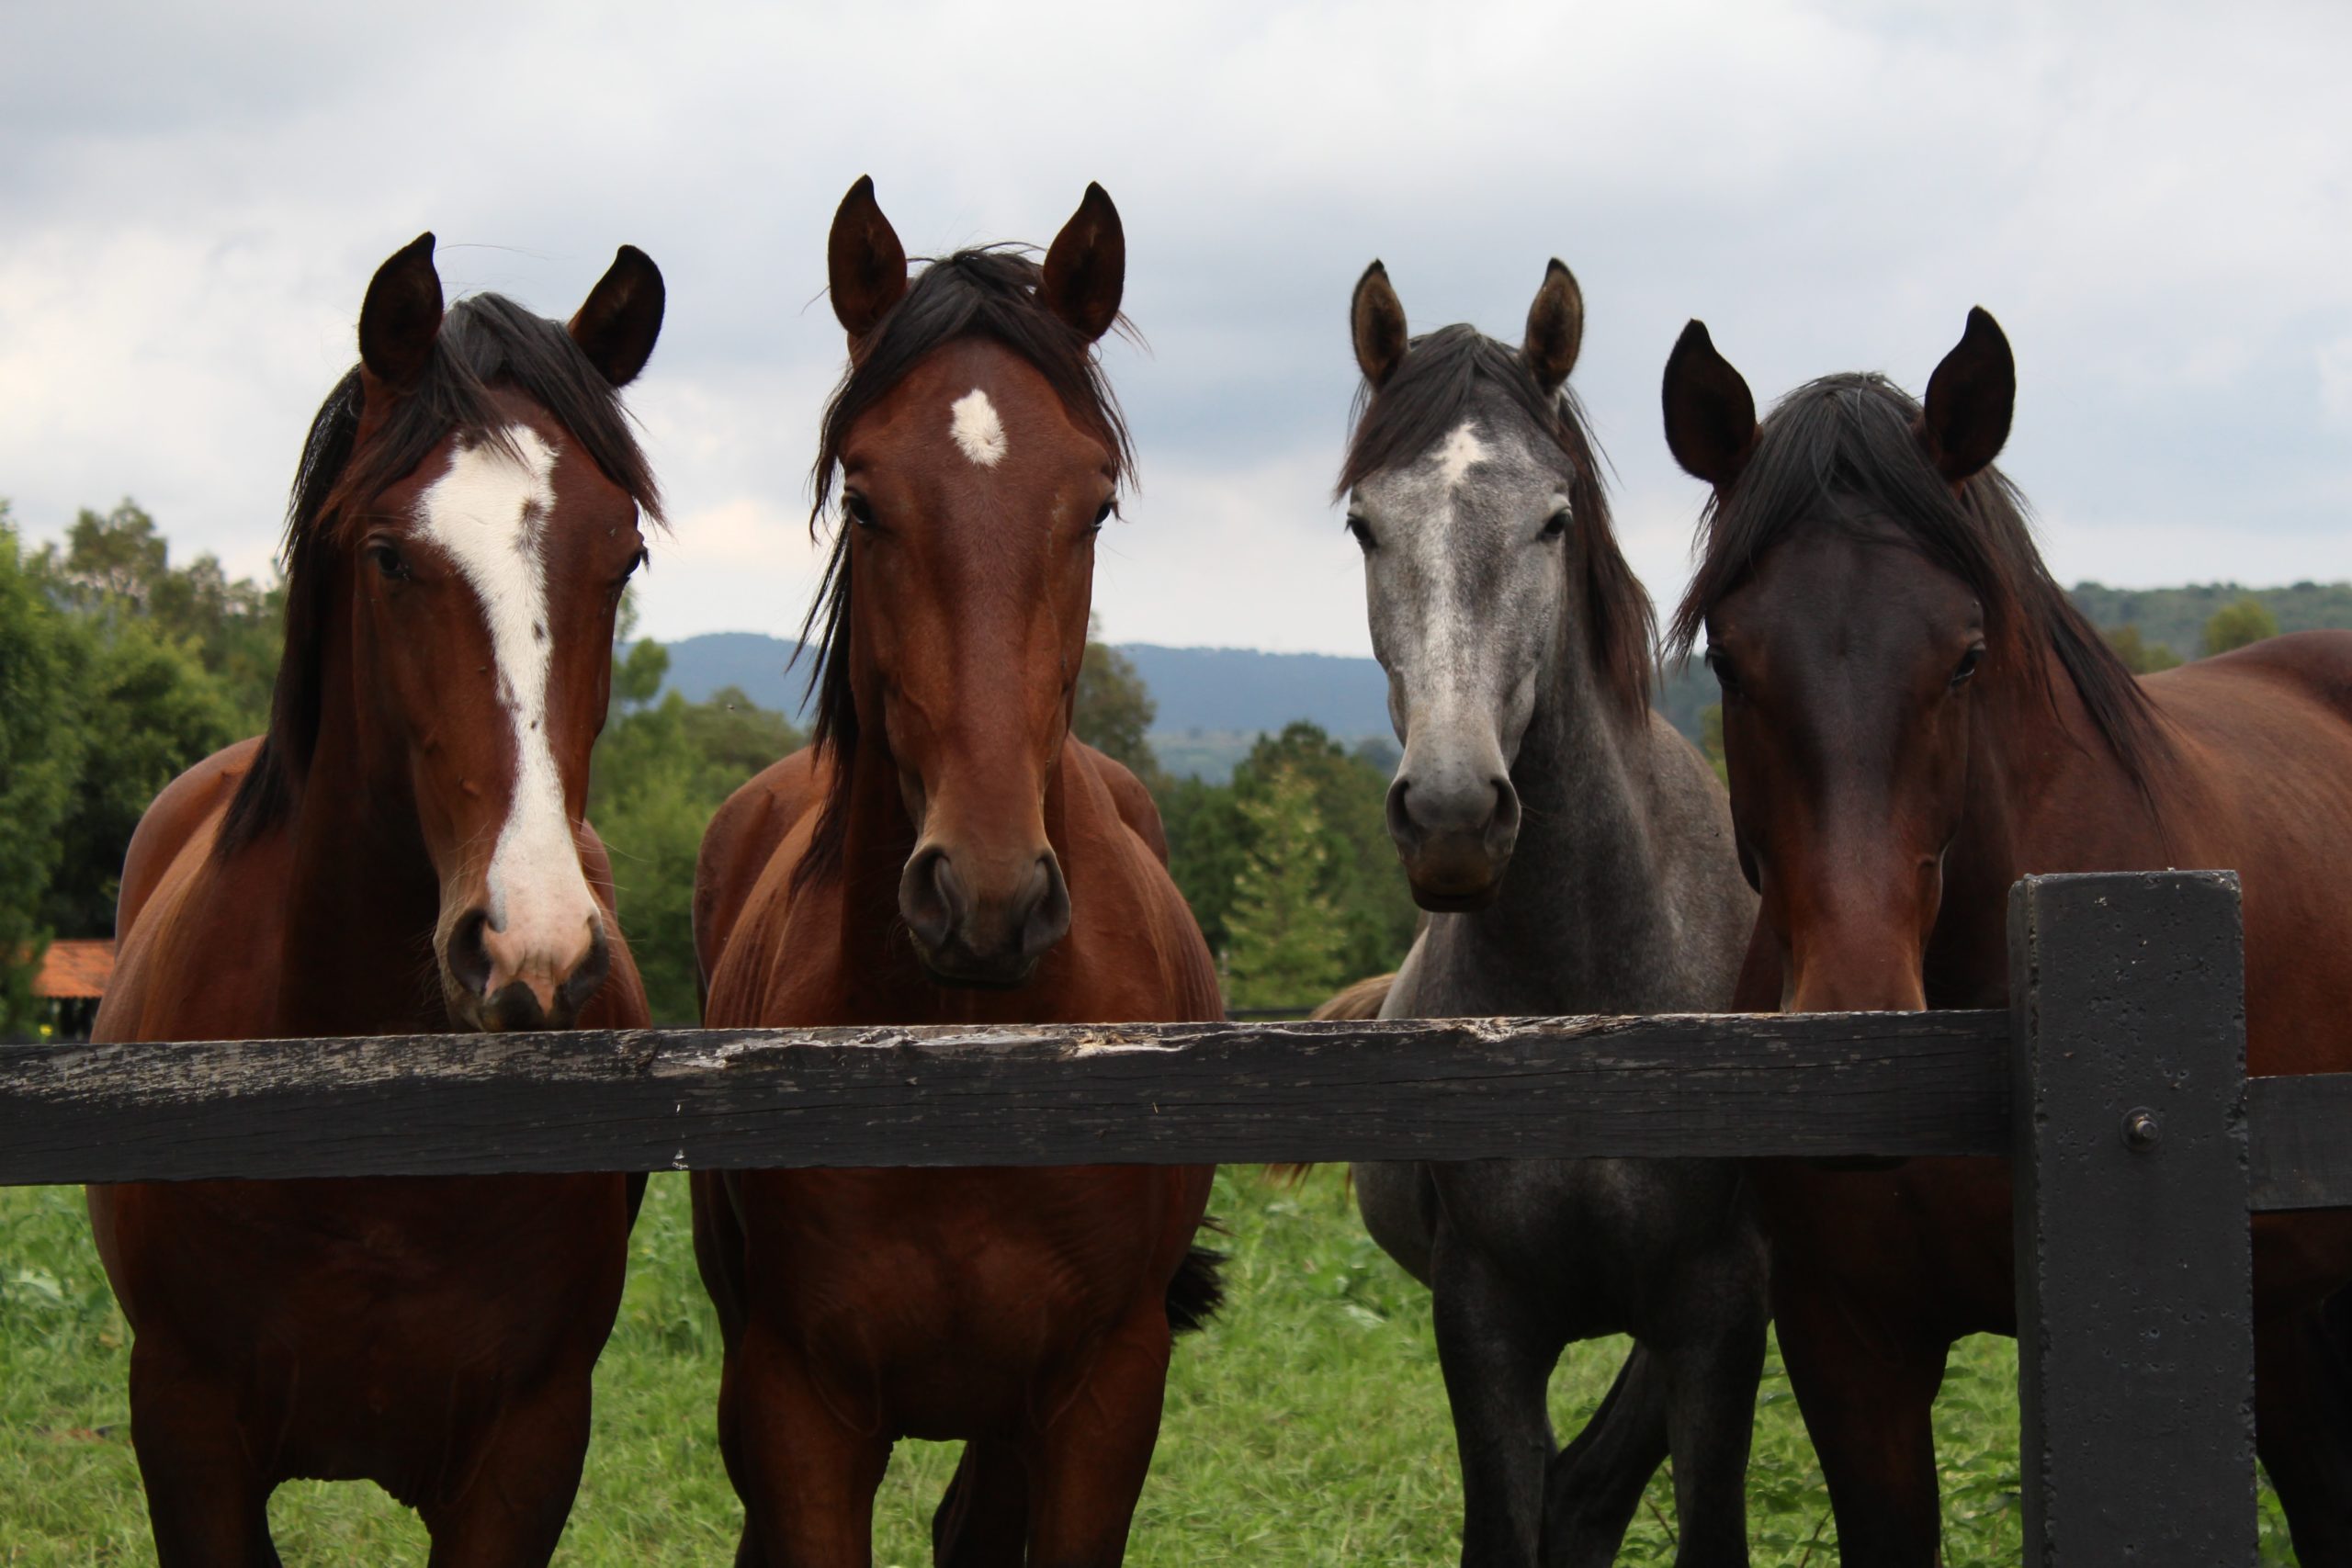 Do You Own Horses? Here Are 2 Beneficial Uses for Horse Manure